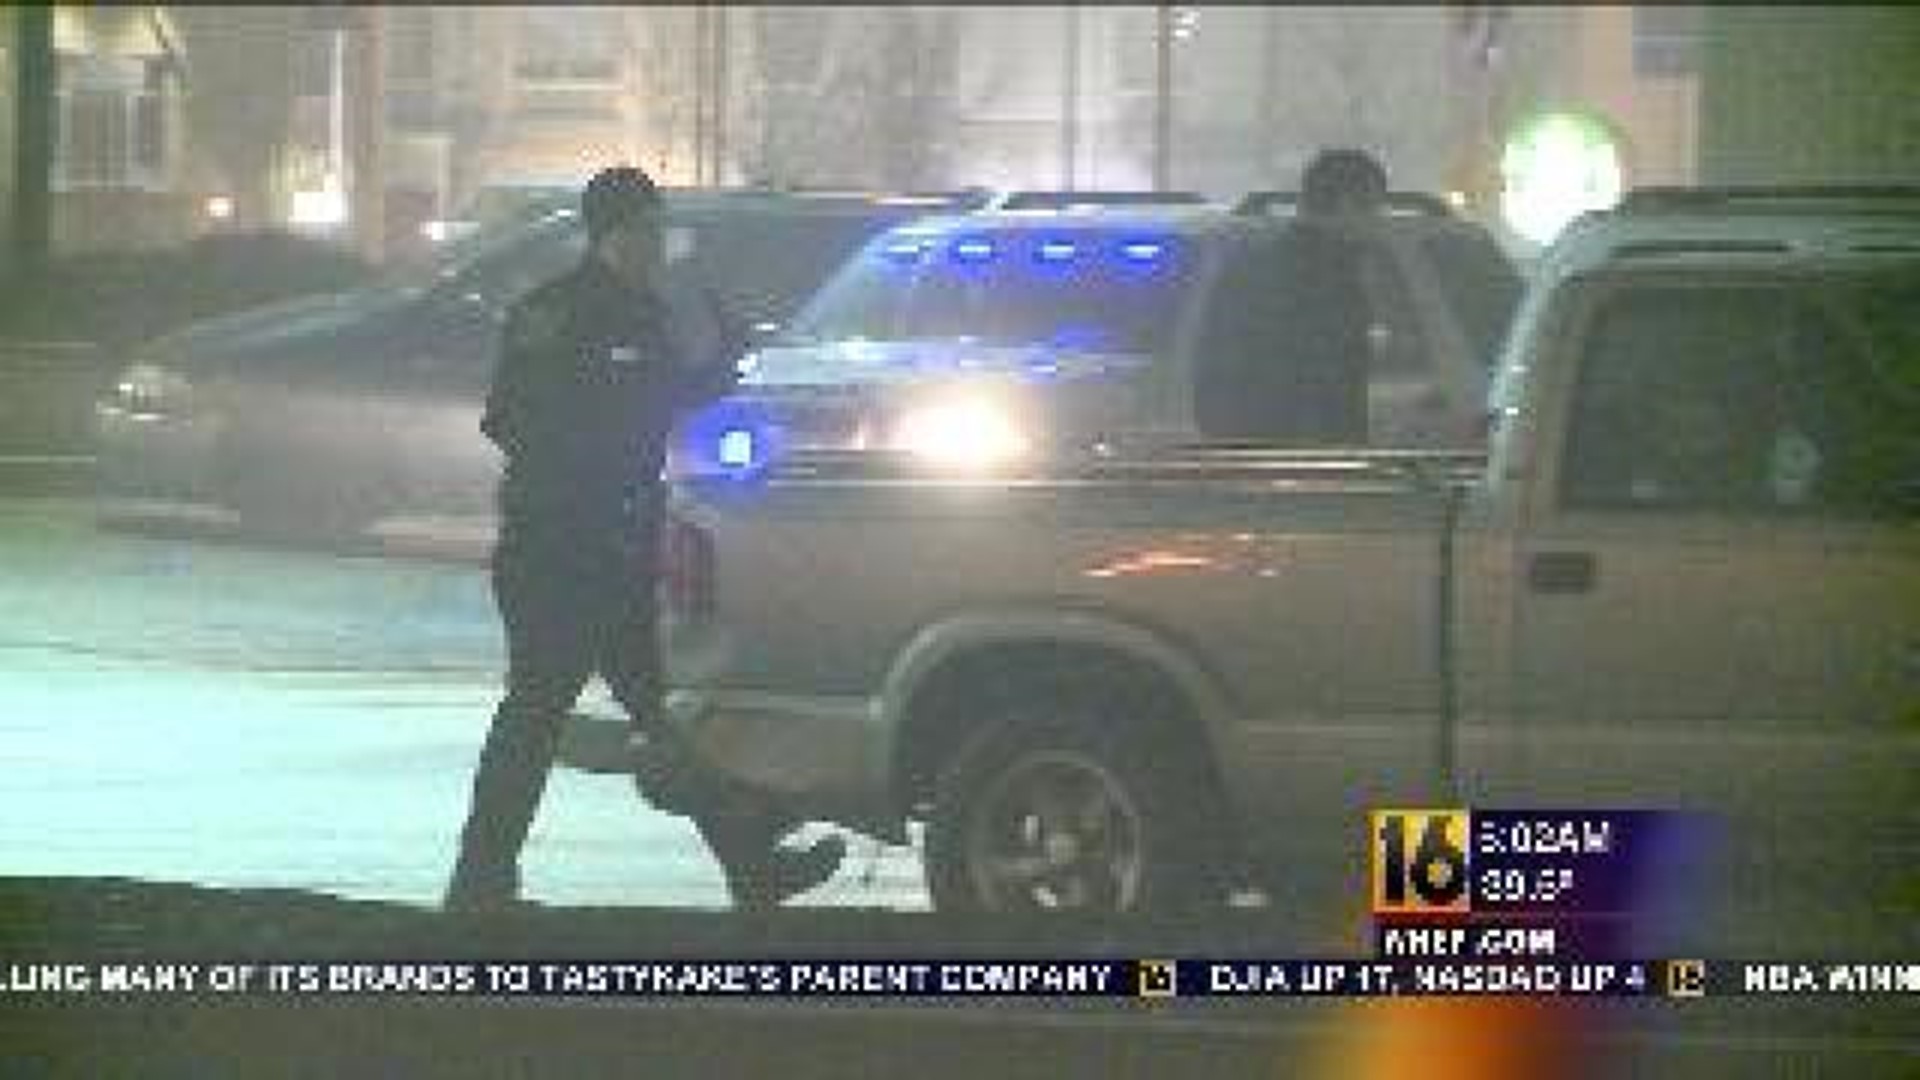 Restaurant Robbed, Employees Barricaded in Freezer